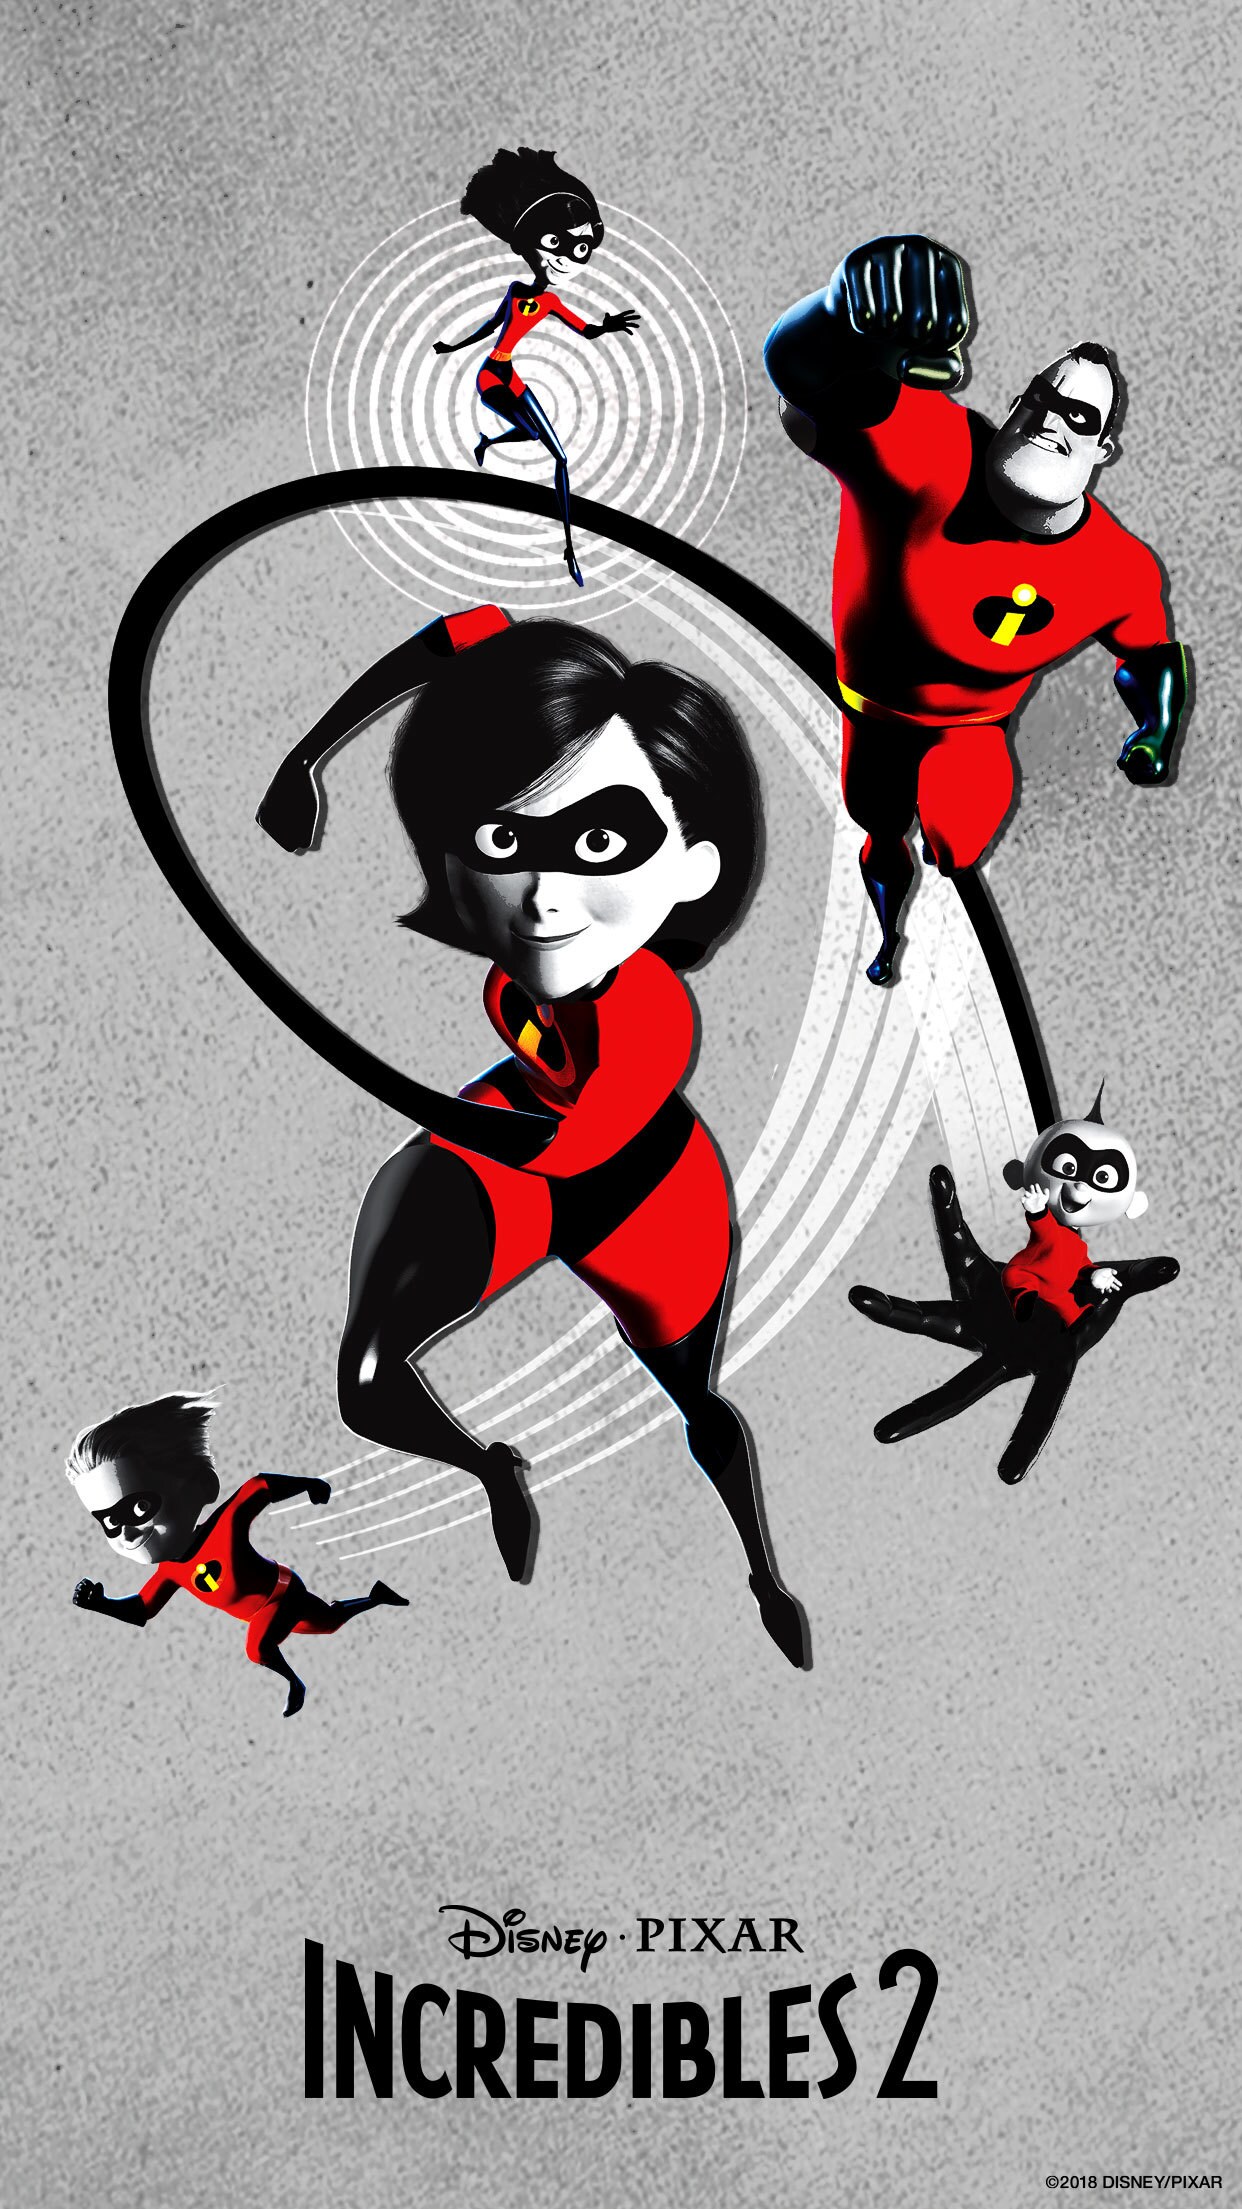 theincredibles22018wallpaperbackgroundhd06